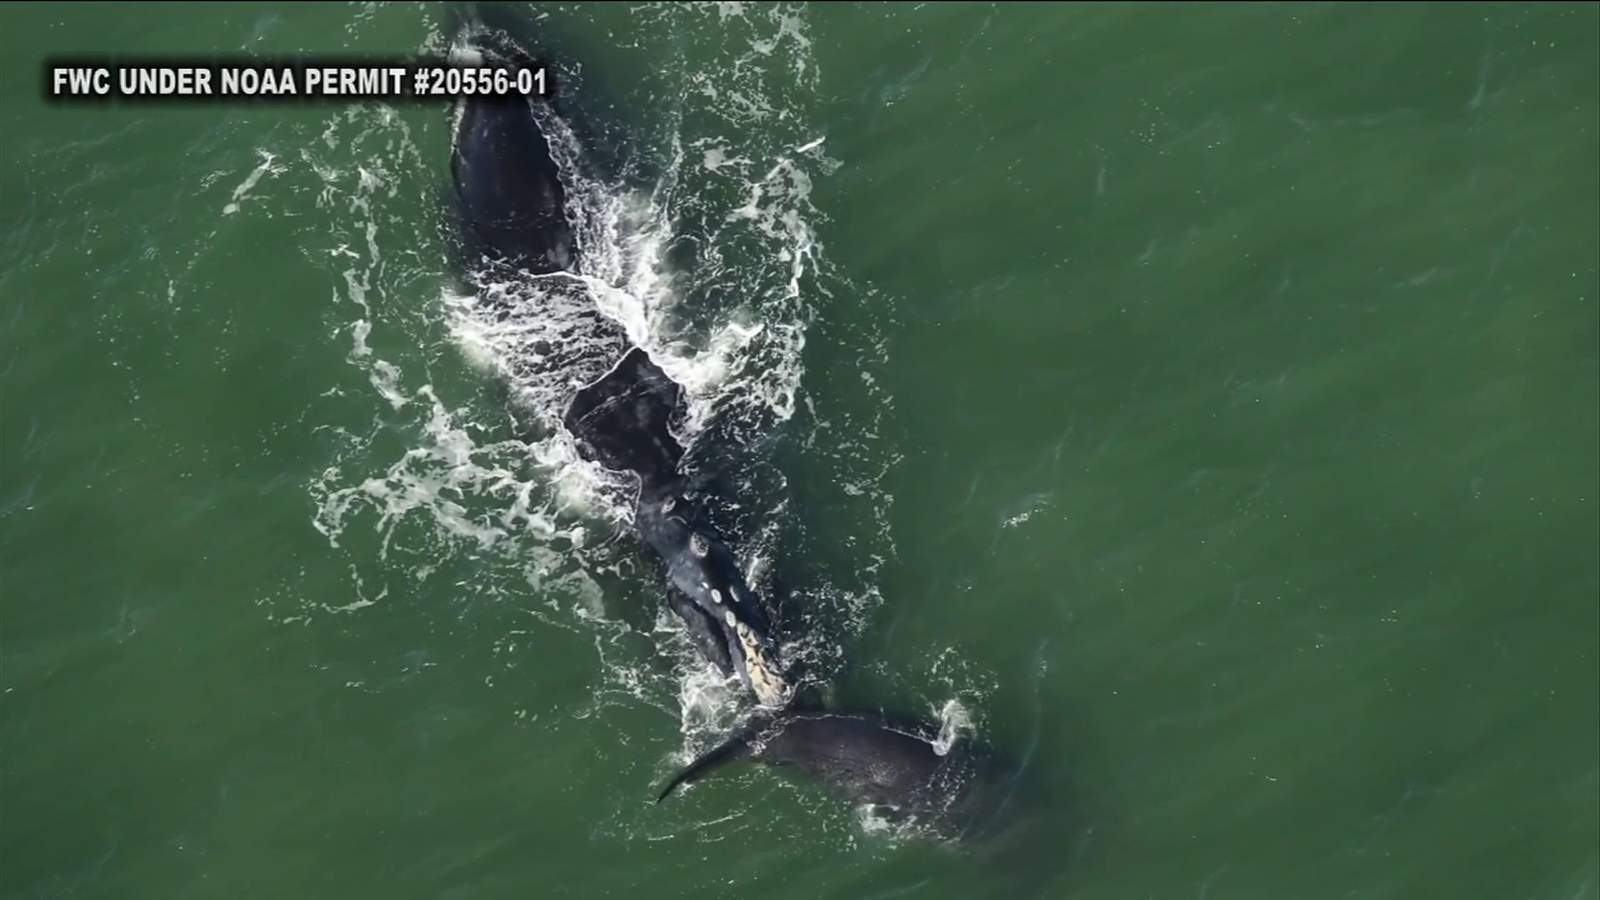 Right whale spotted off Northeast Florida coast is 16th this season